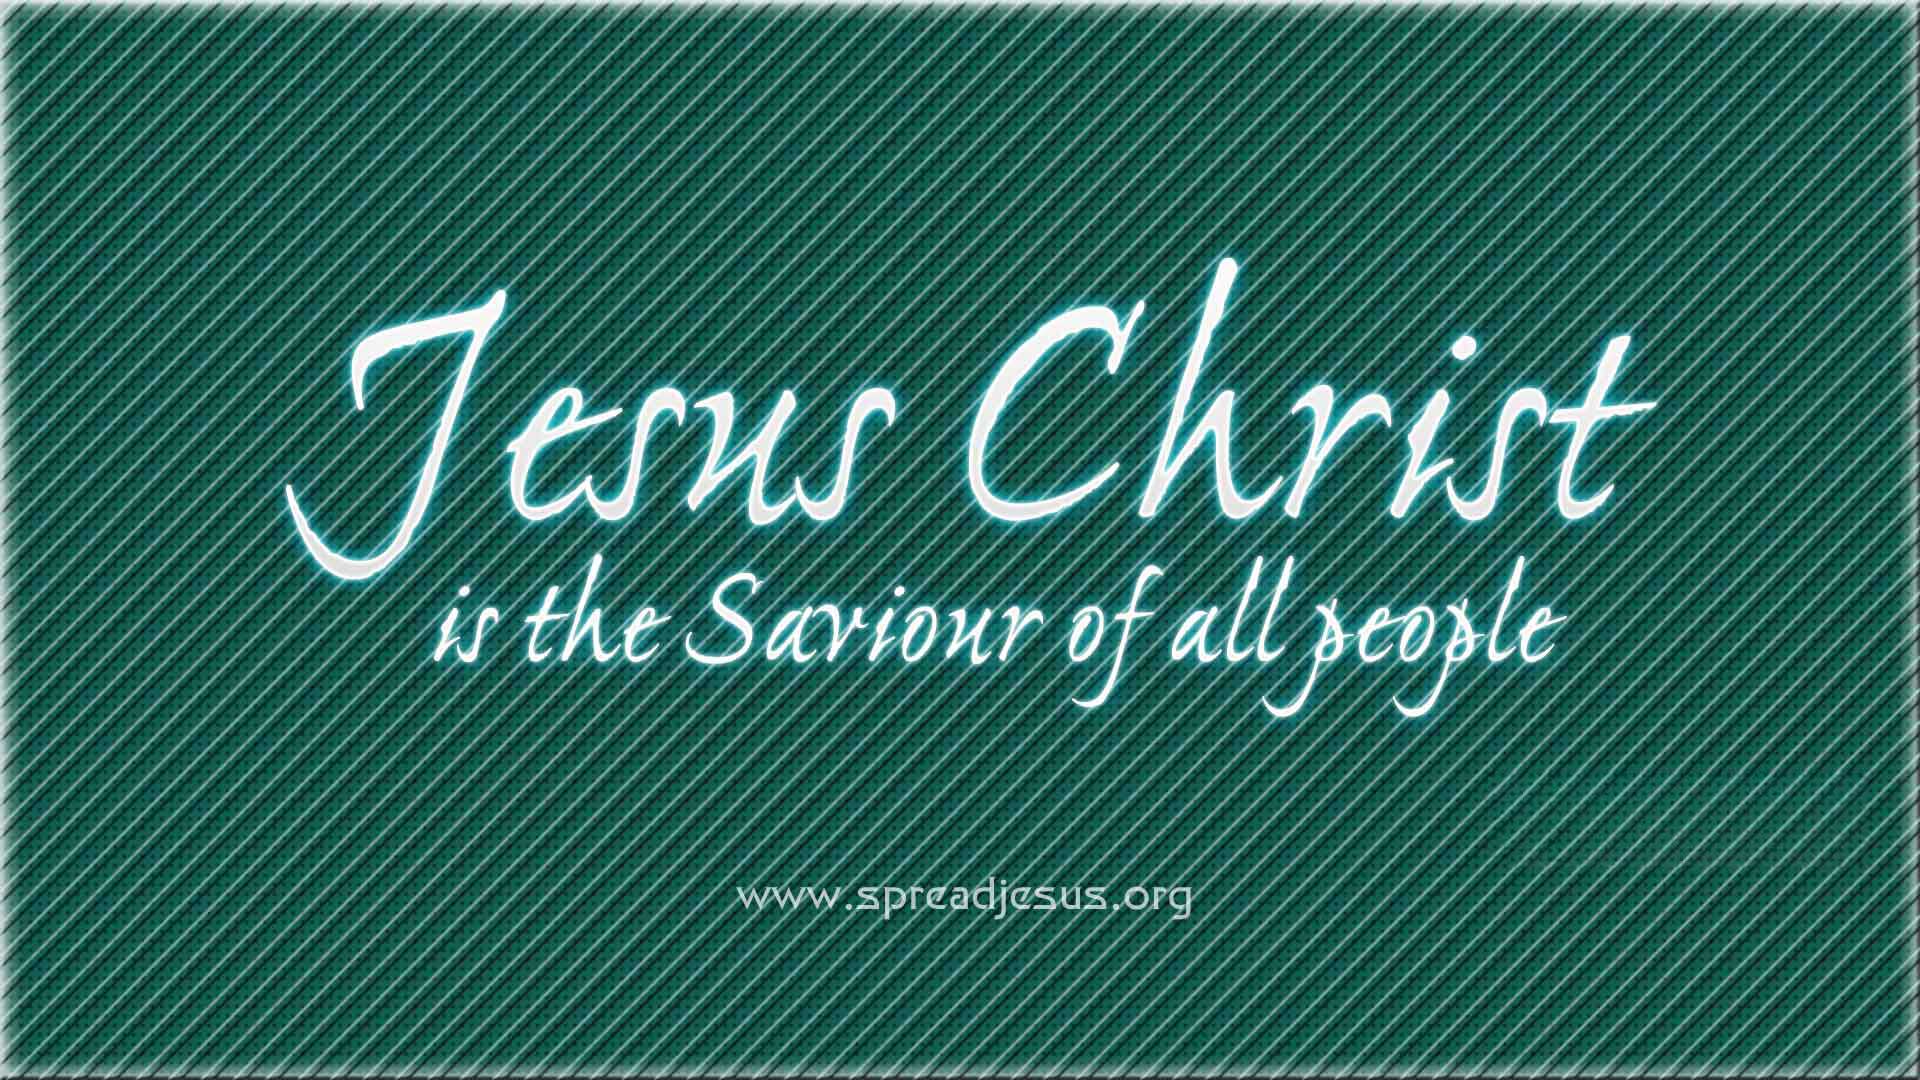 christ HD wallpaper pack 2 Jesus Christ is the saviour of all